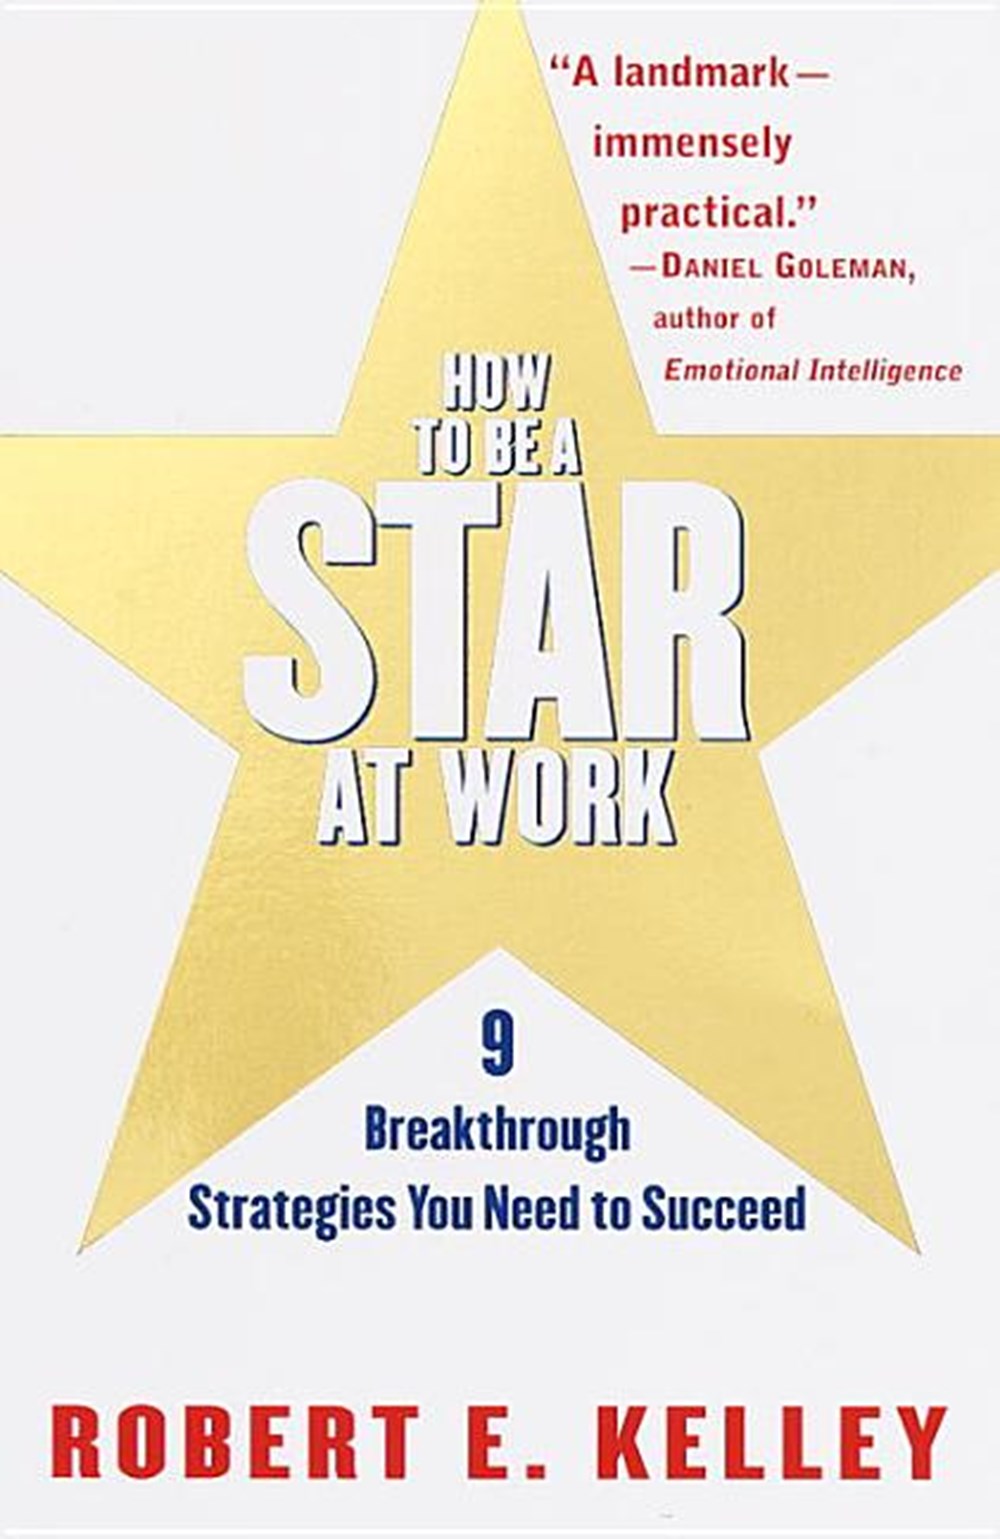 How to Be a Star at Work 9 Breakthrough Strategies You Need to Succeed